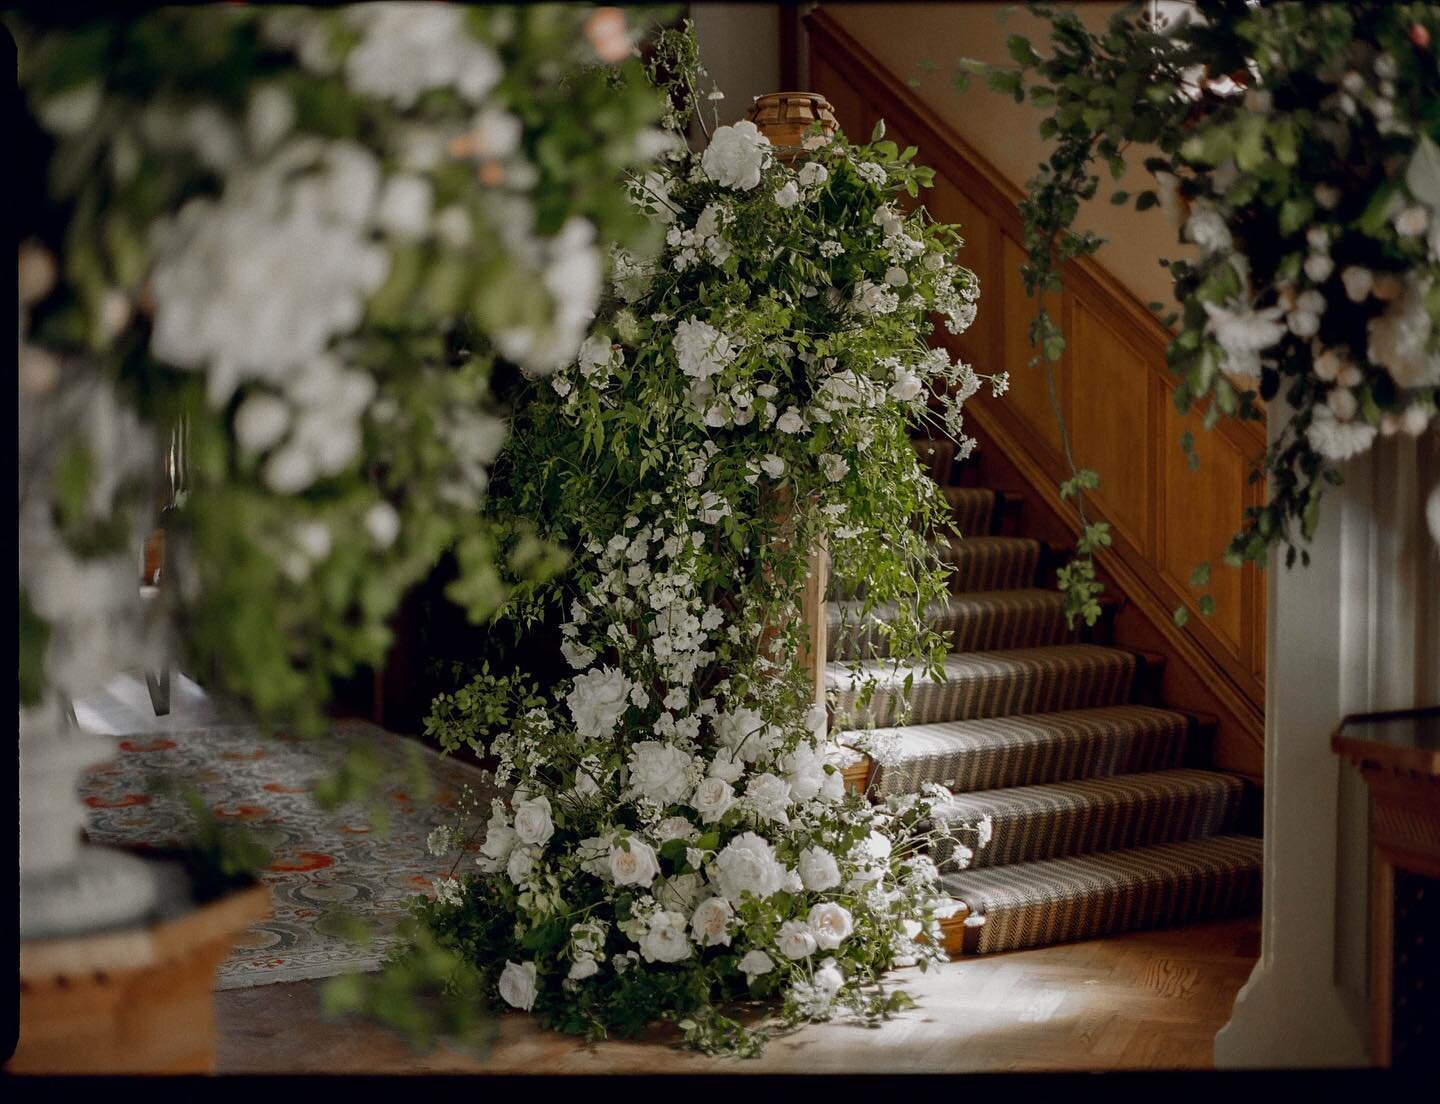 A staircase festooned with rose trails, jasmine, roses, peonies and orlaya @oakleycourt for A&amp;S.

Planner - @arc.events_ 
Photographer - @joannabrownphotos